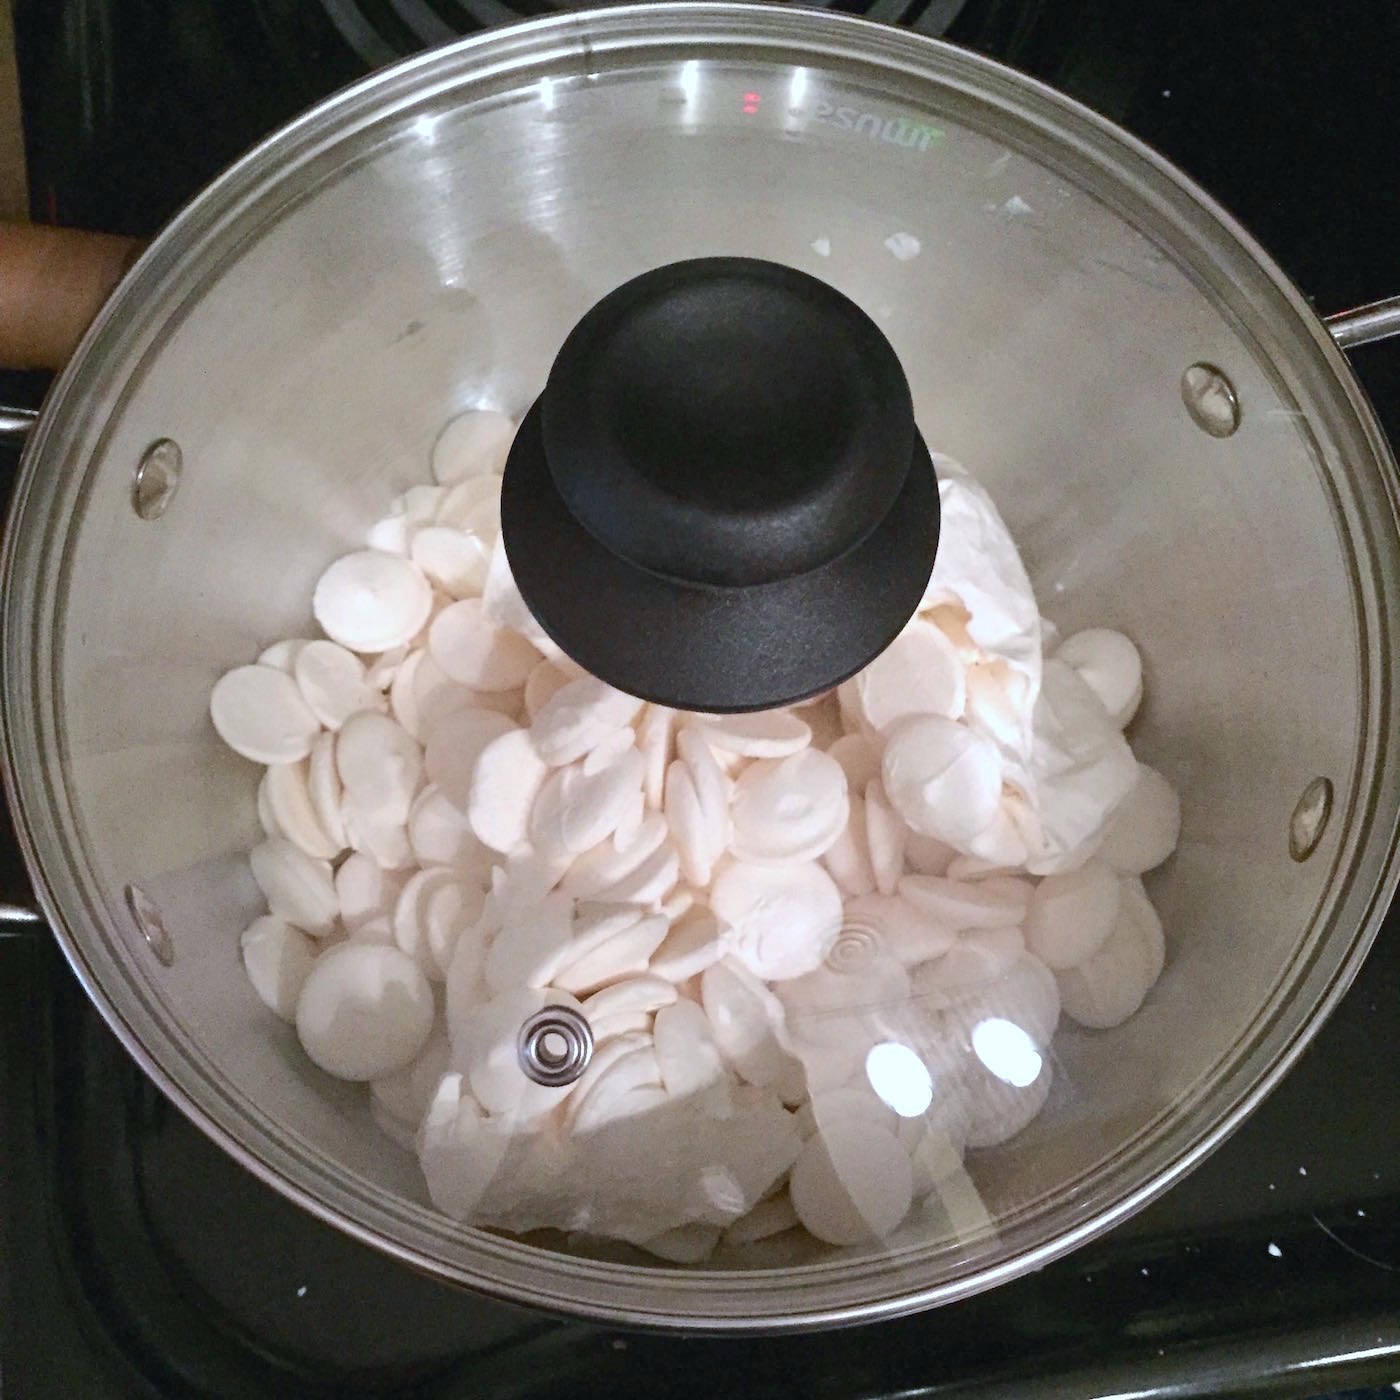 Candy melts in a sauce pan with the lid on